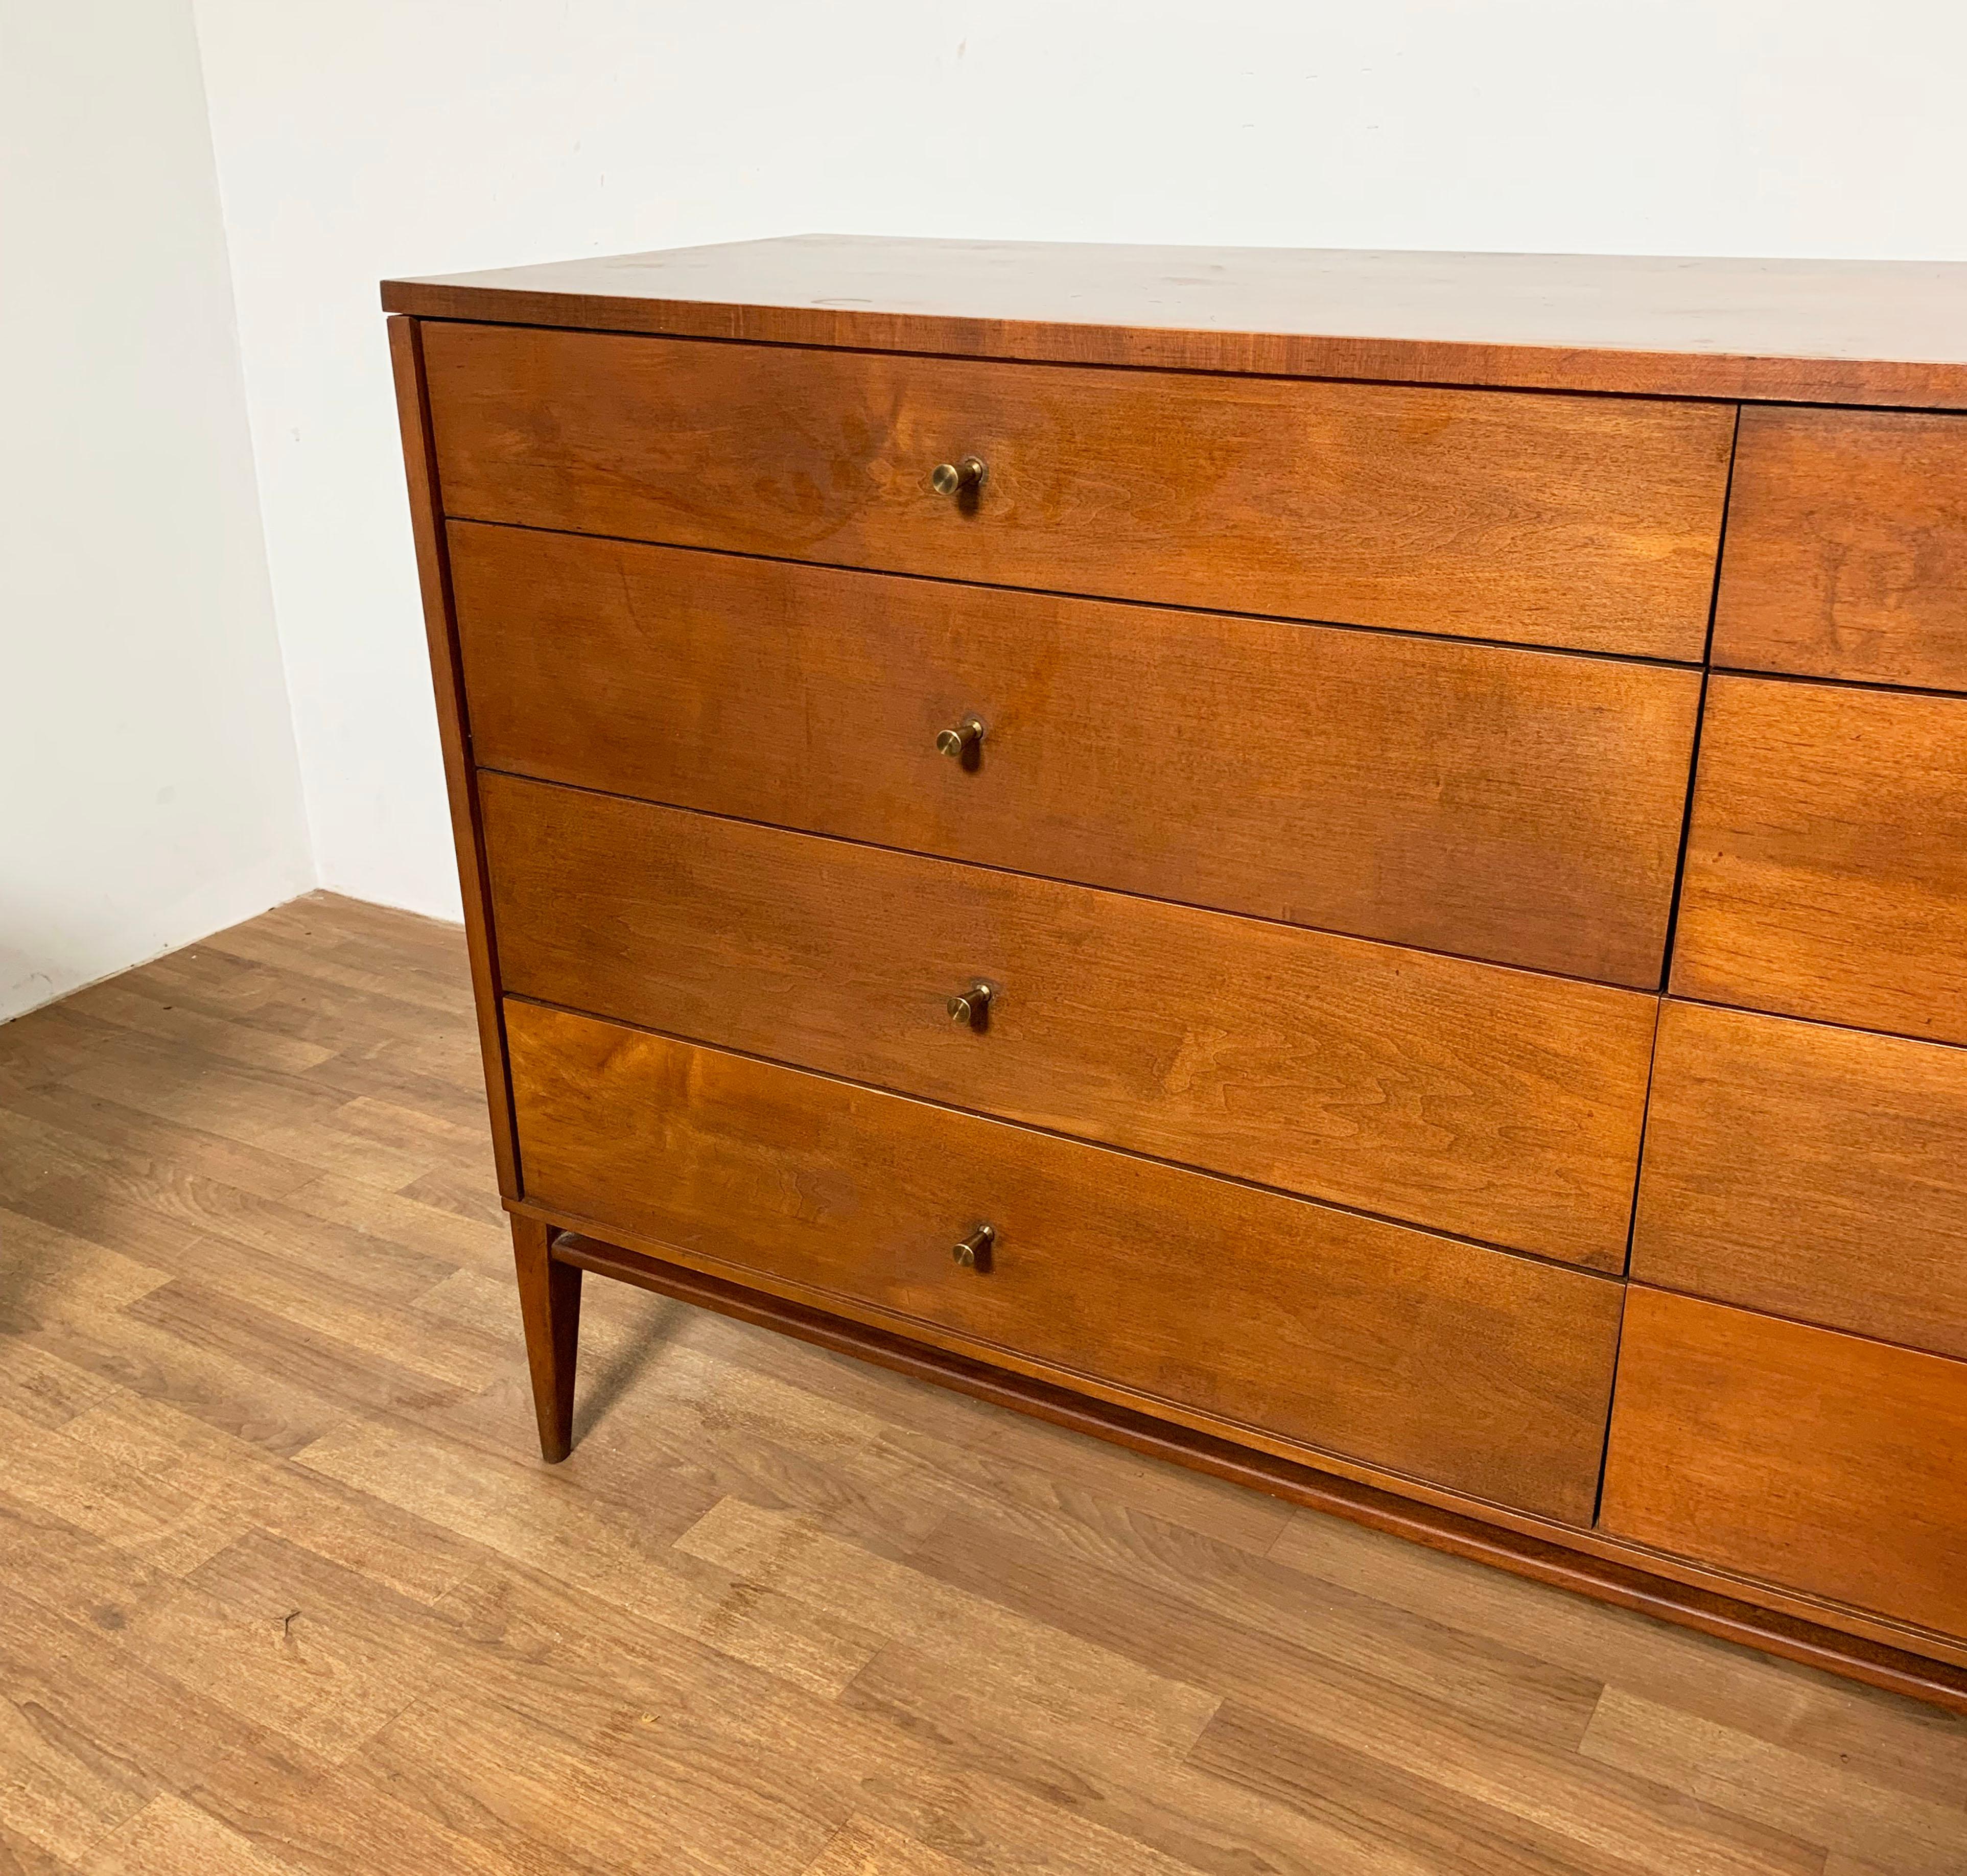 An eight drawer dresser by Paul McCobb for Winchendon Furniture in original light tobacco finish.